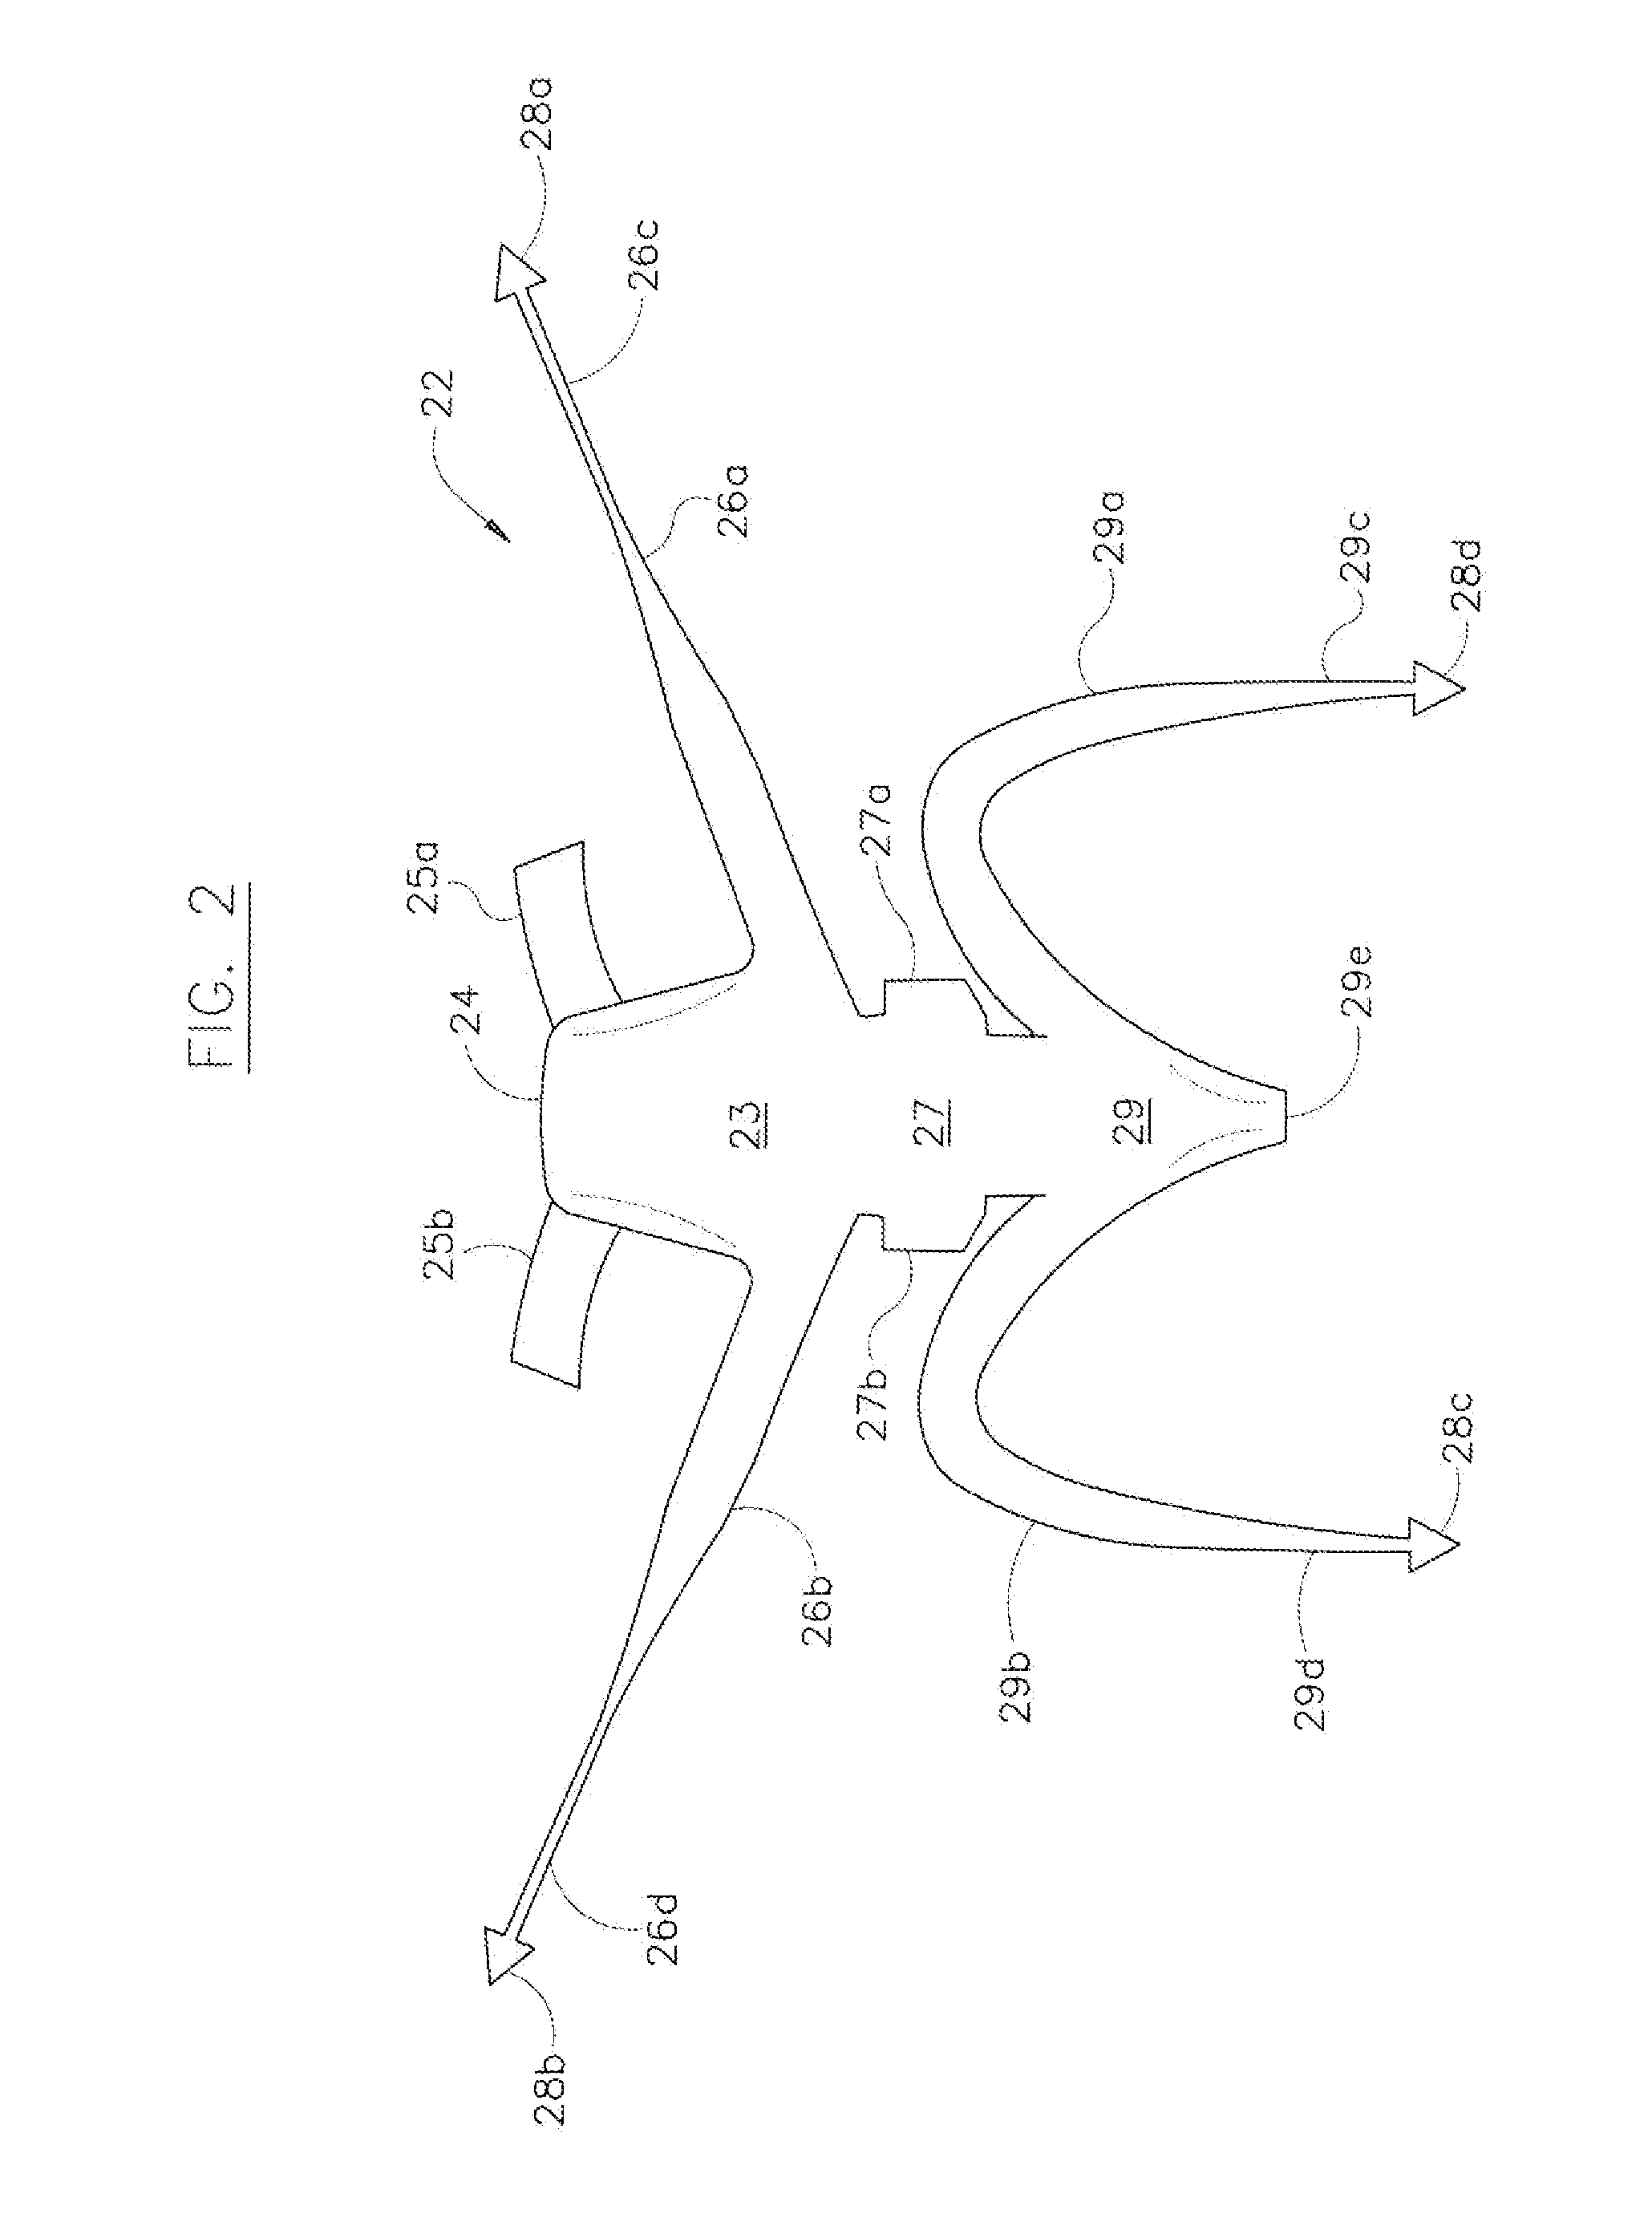 Apparatus for Treating Anterior and Posterior Vaginal Wall Prolapse